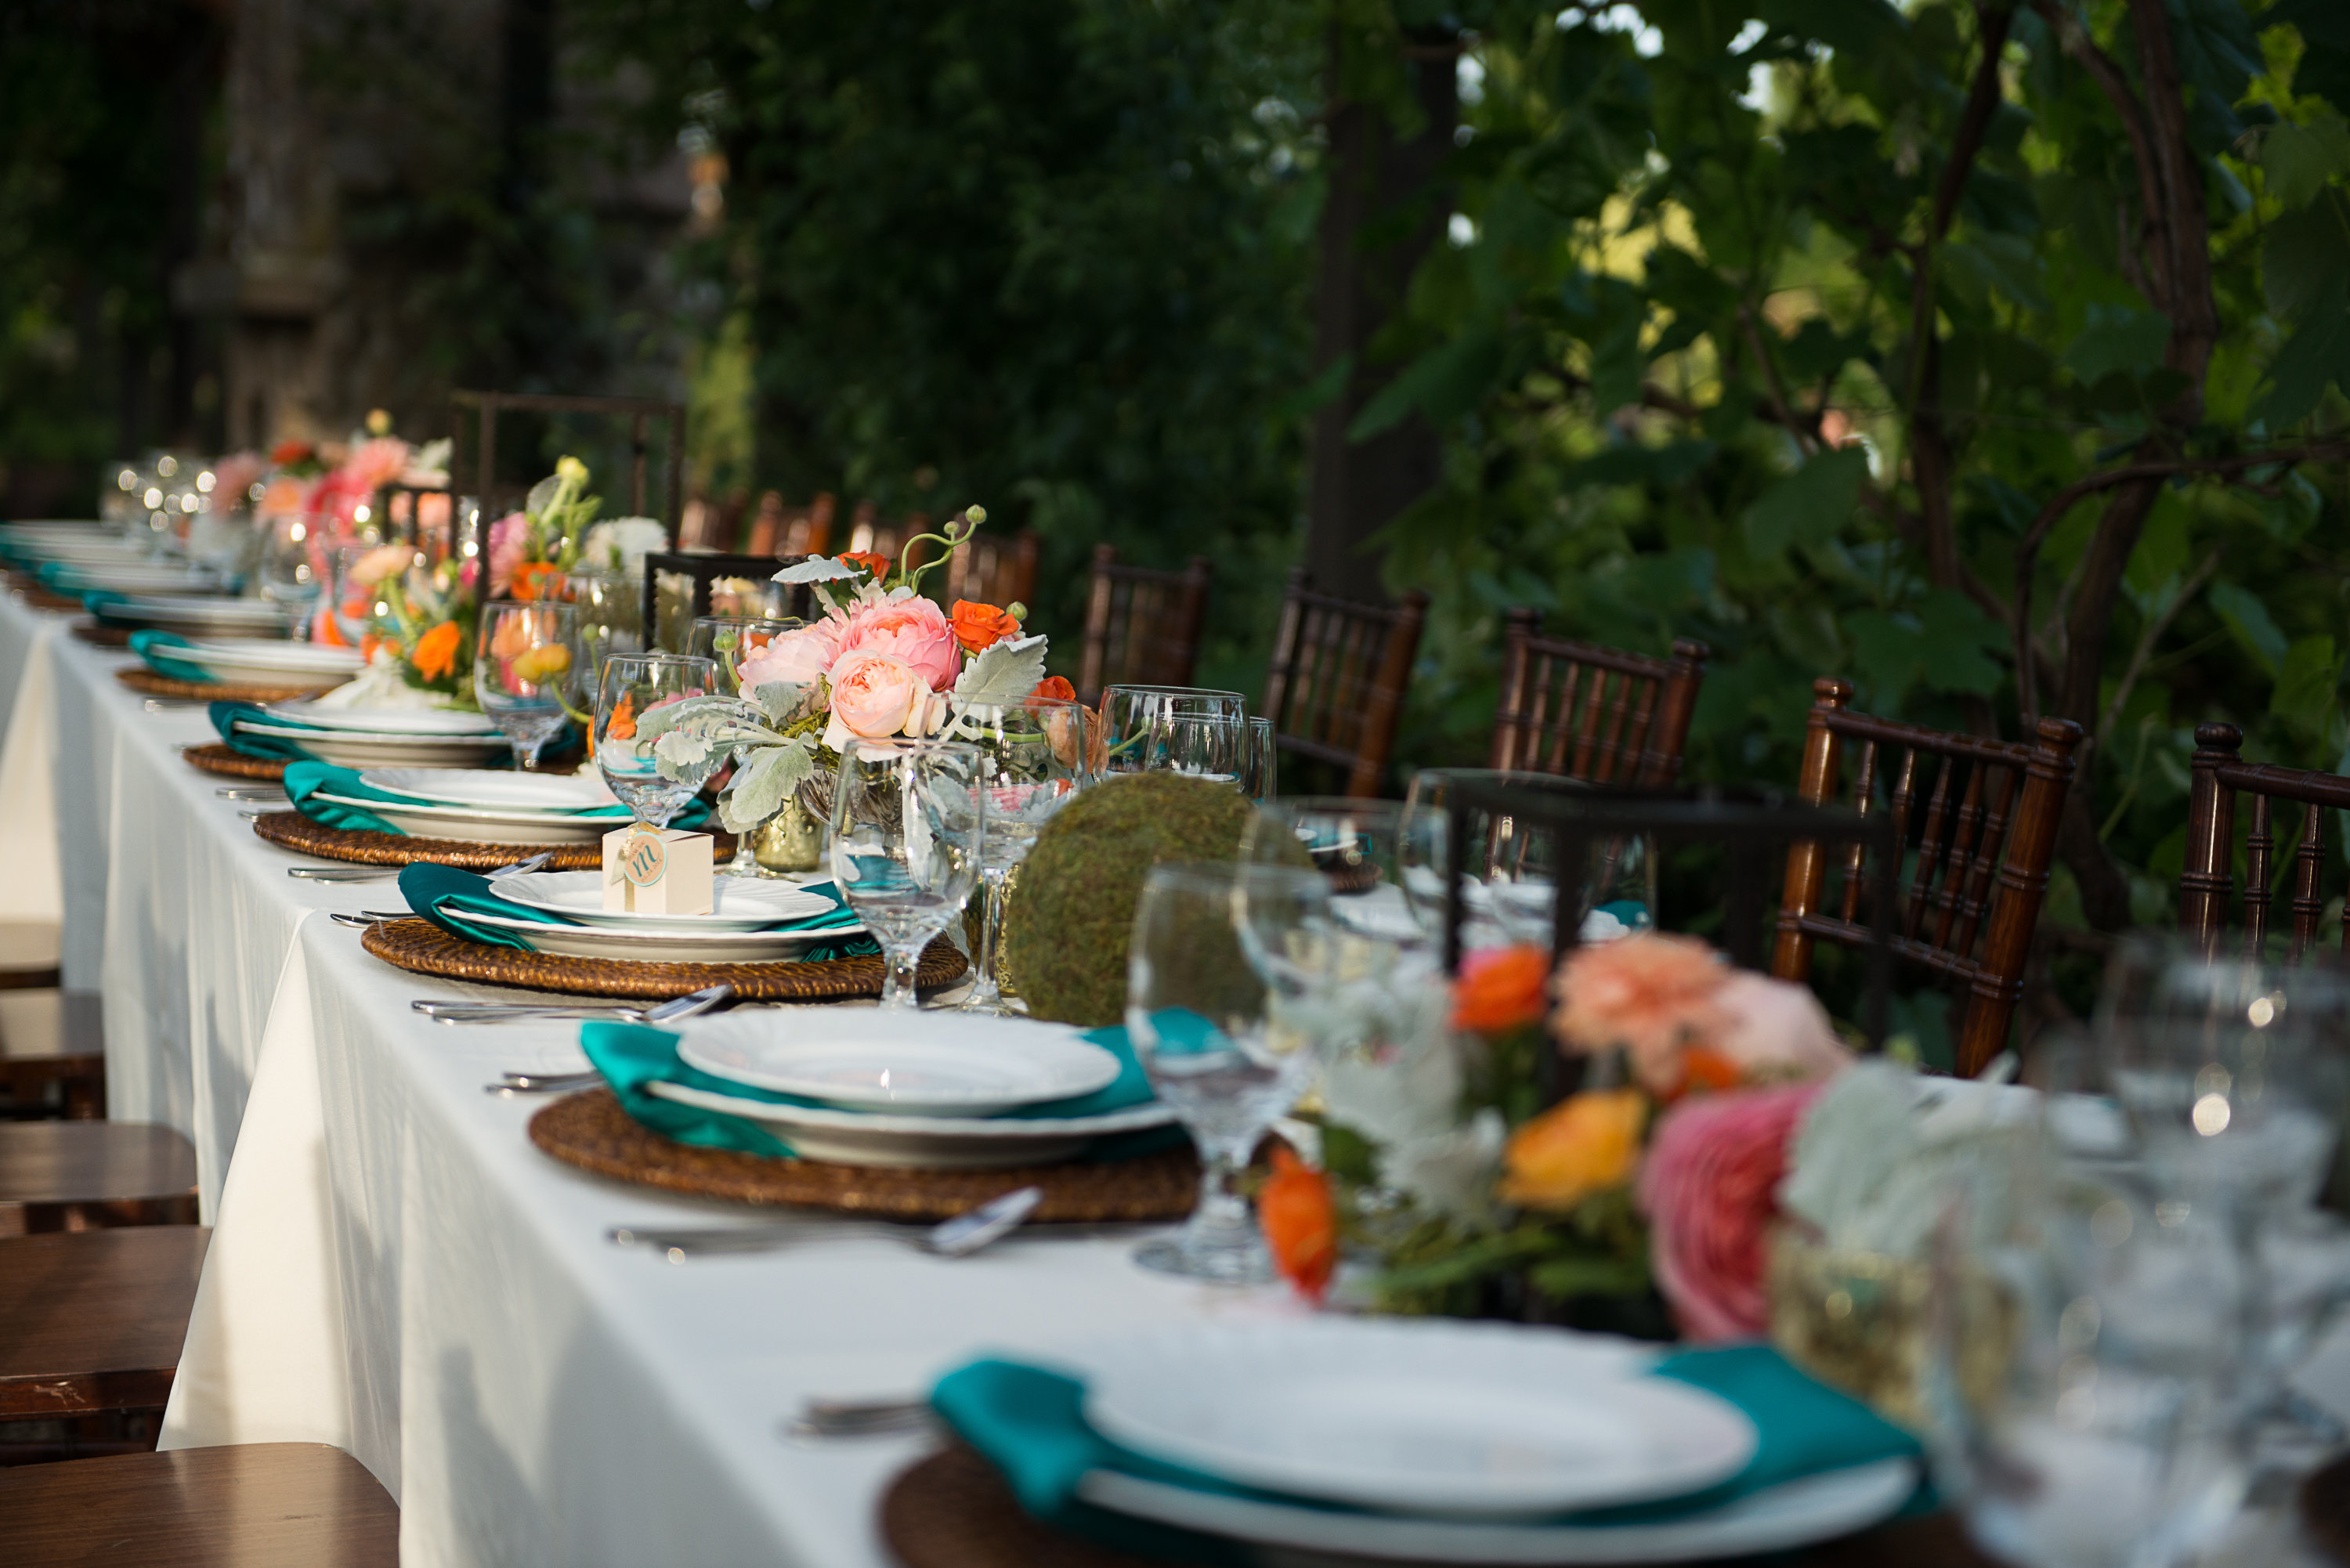 Tablescapes, teal and coral table escapes, luxury tables capes |Lydia Gillis Photography